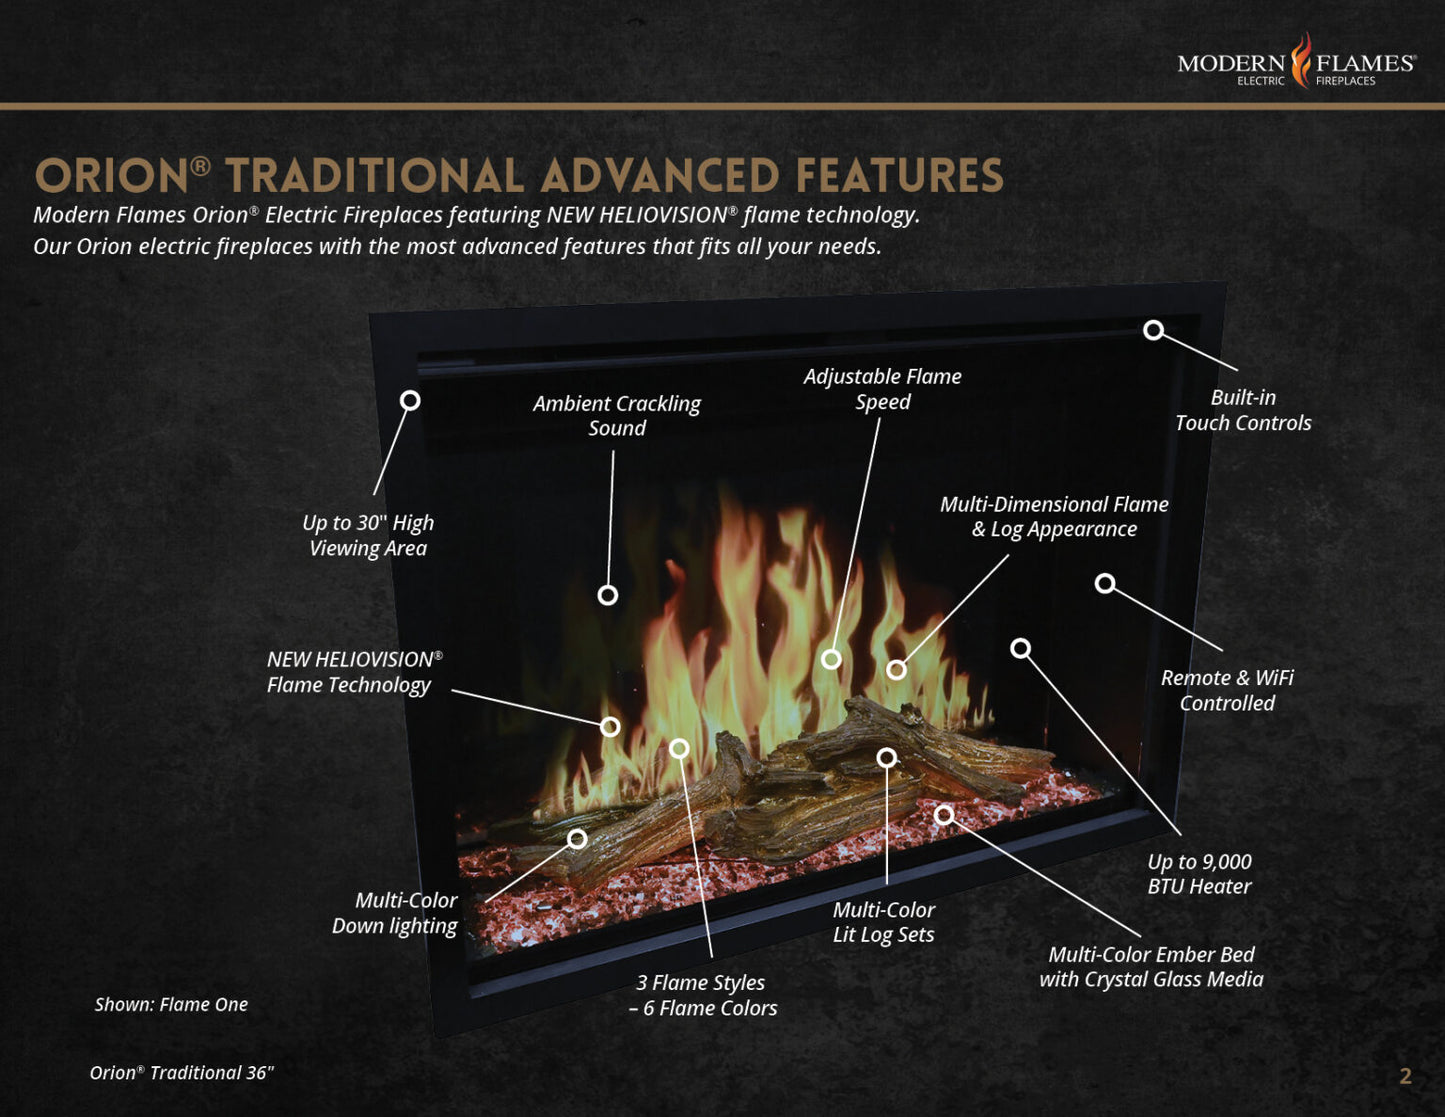 42" Modern Flames Orion® Traditional Electric Fireplace OR42-TRAD